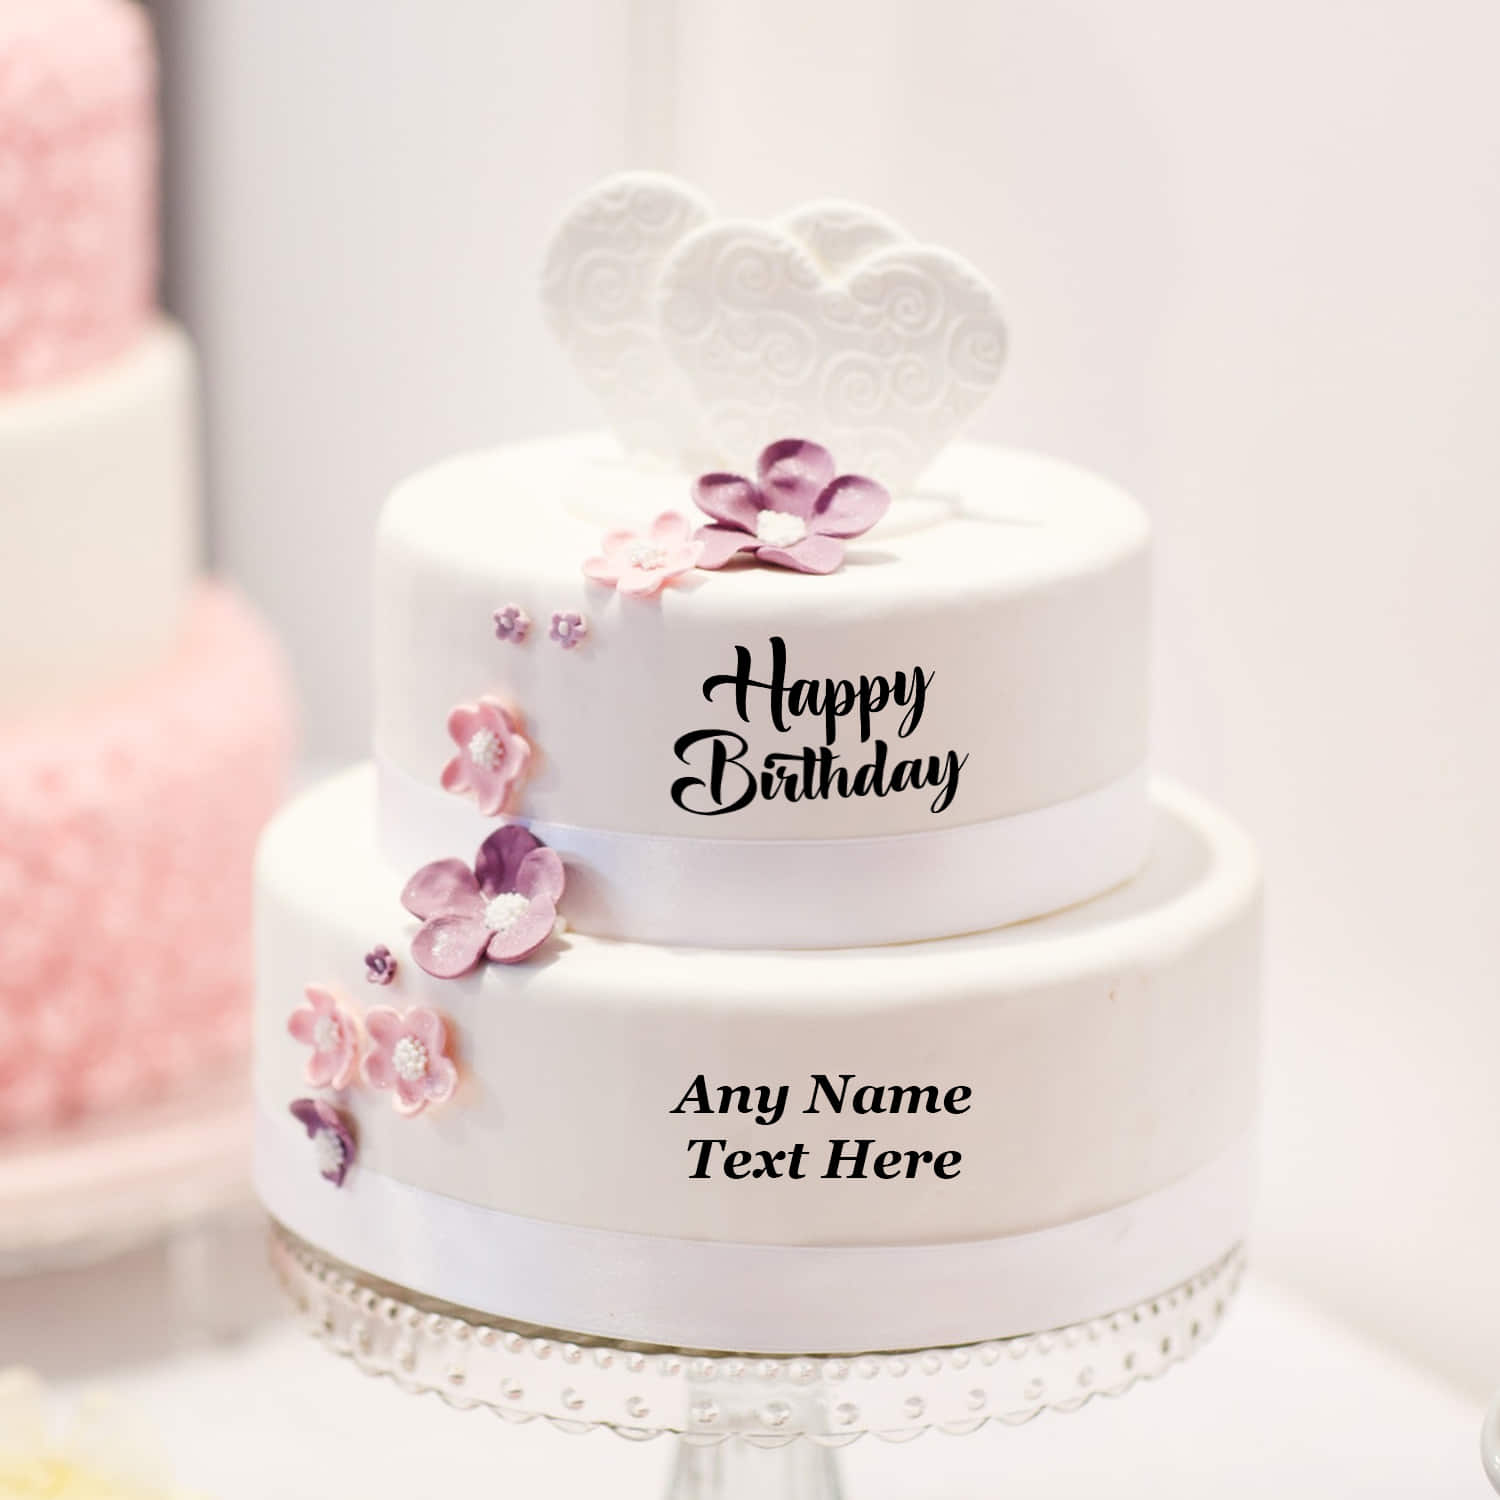 Birthday Cake Stock Photos and Images - 123RF